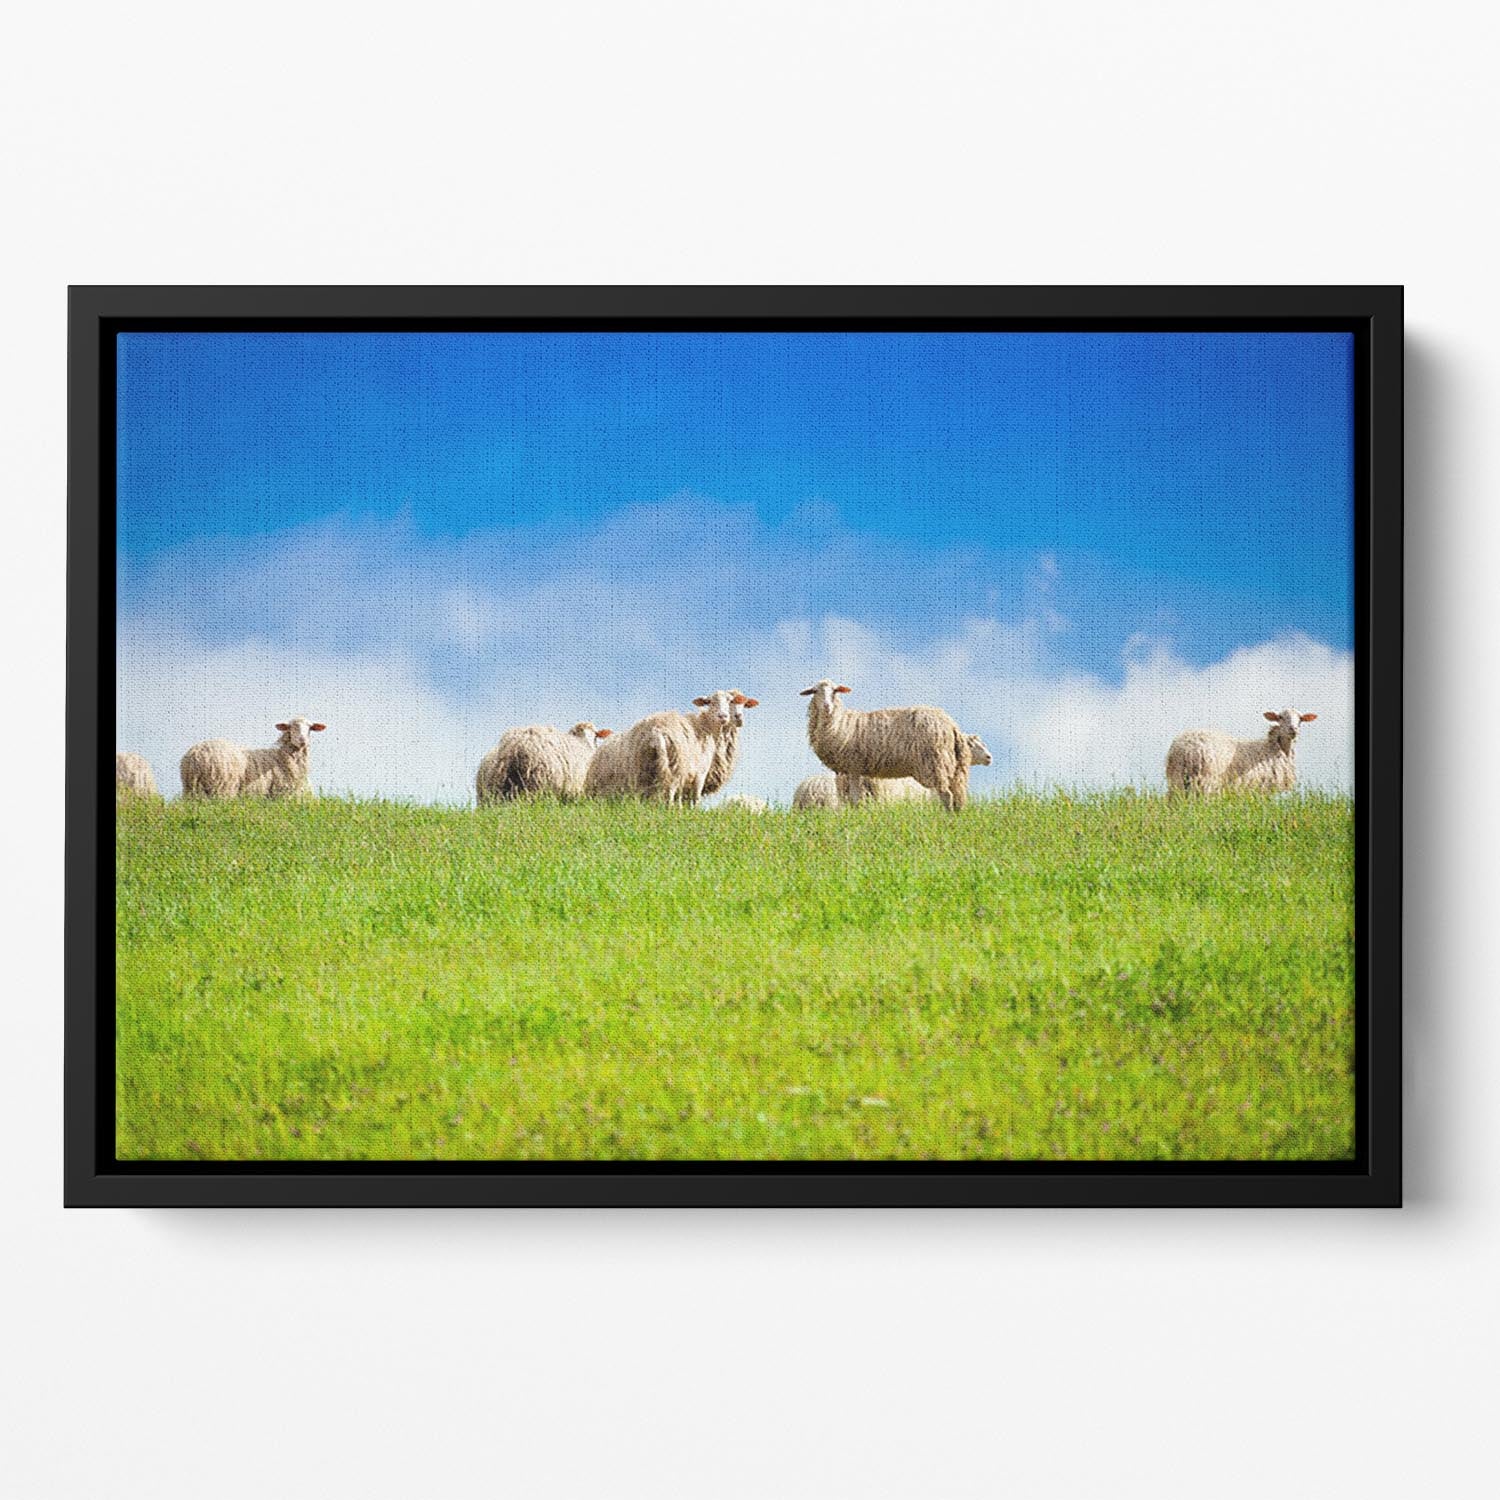 Two sheep looking at camera standing in herd Floating Framed Canvas - Canvas Art Rocks - 2